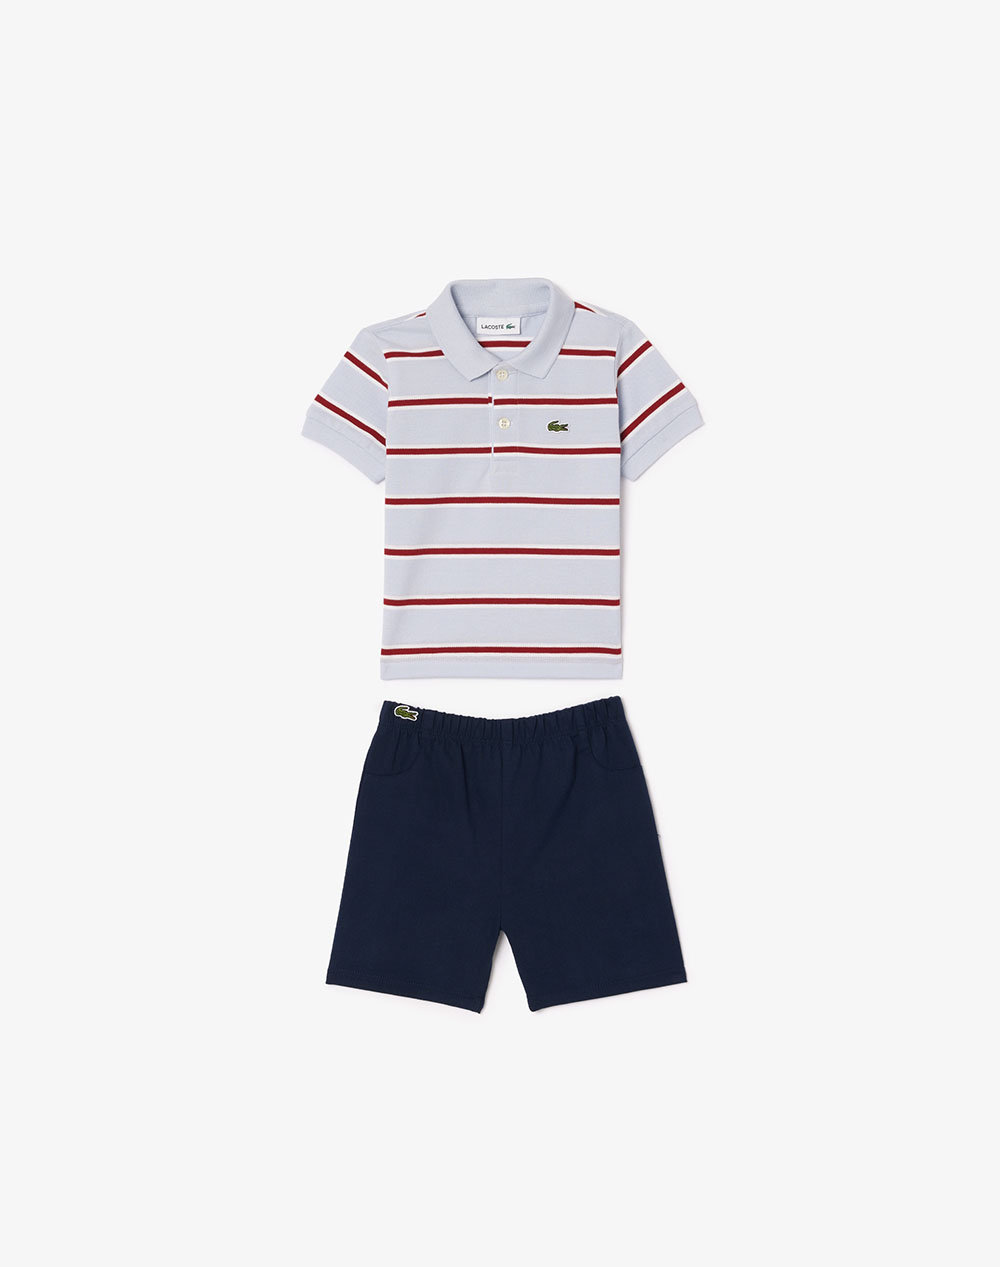 LACOSTE SET CADOURI BEBE CHILDREN GIFT OUTFIT